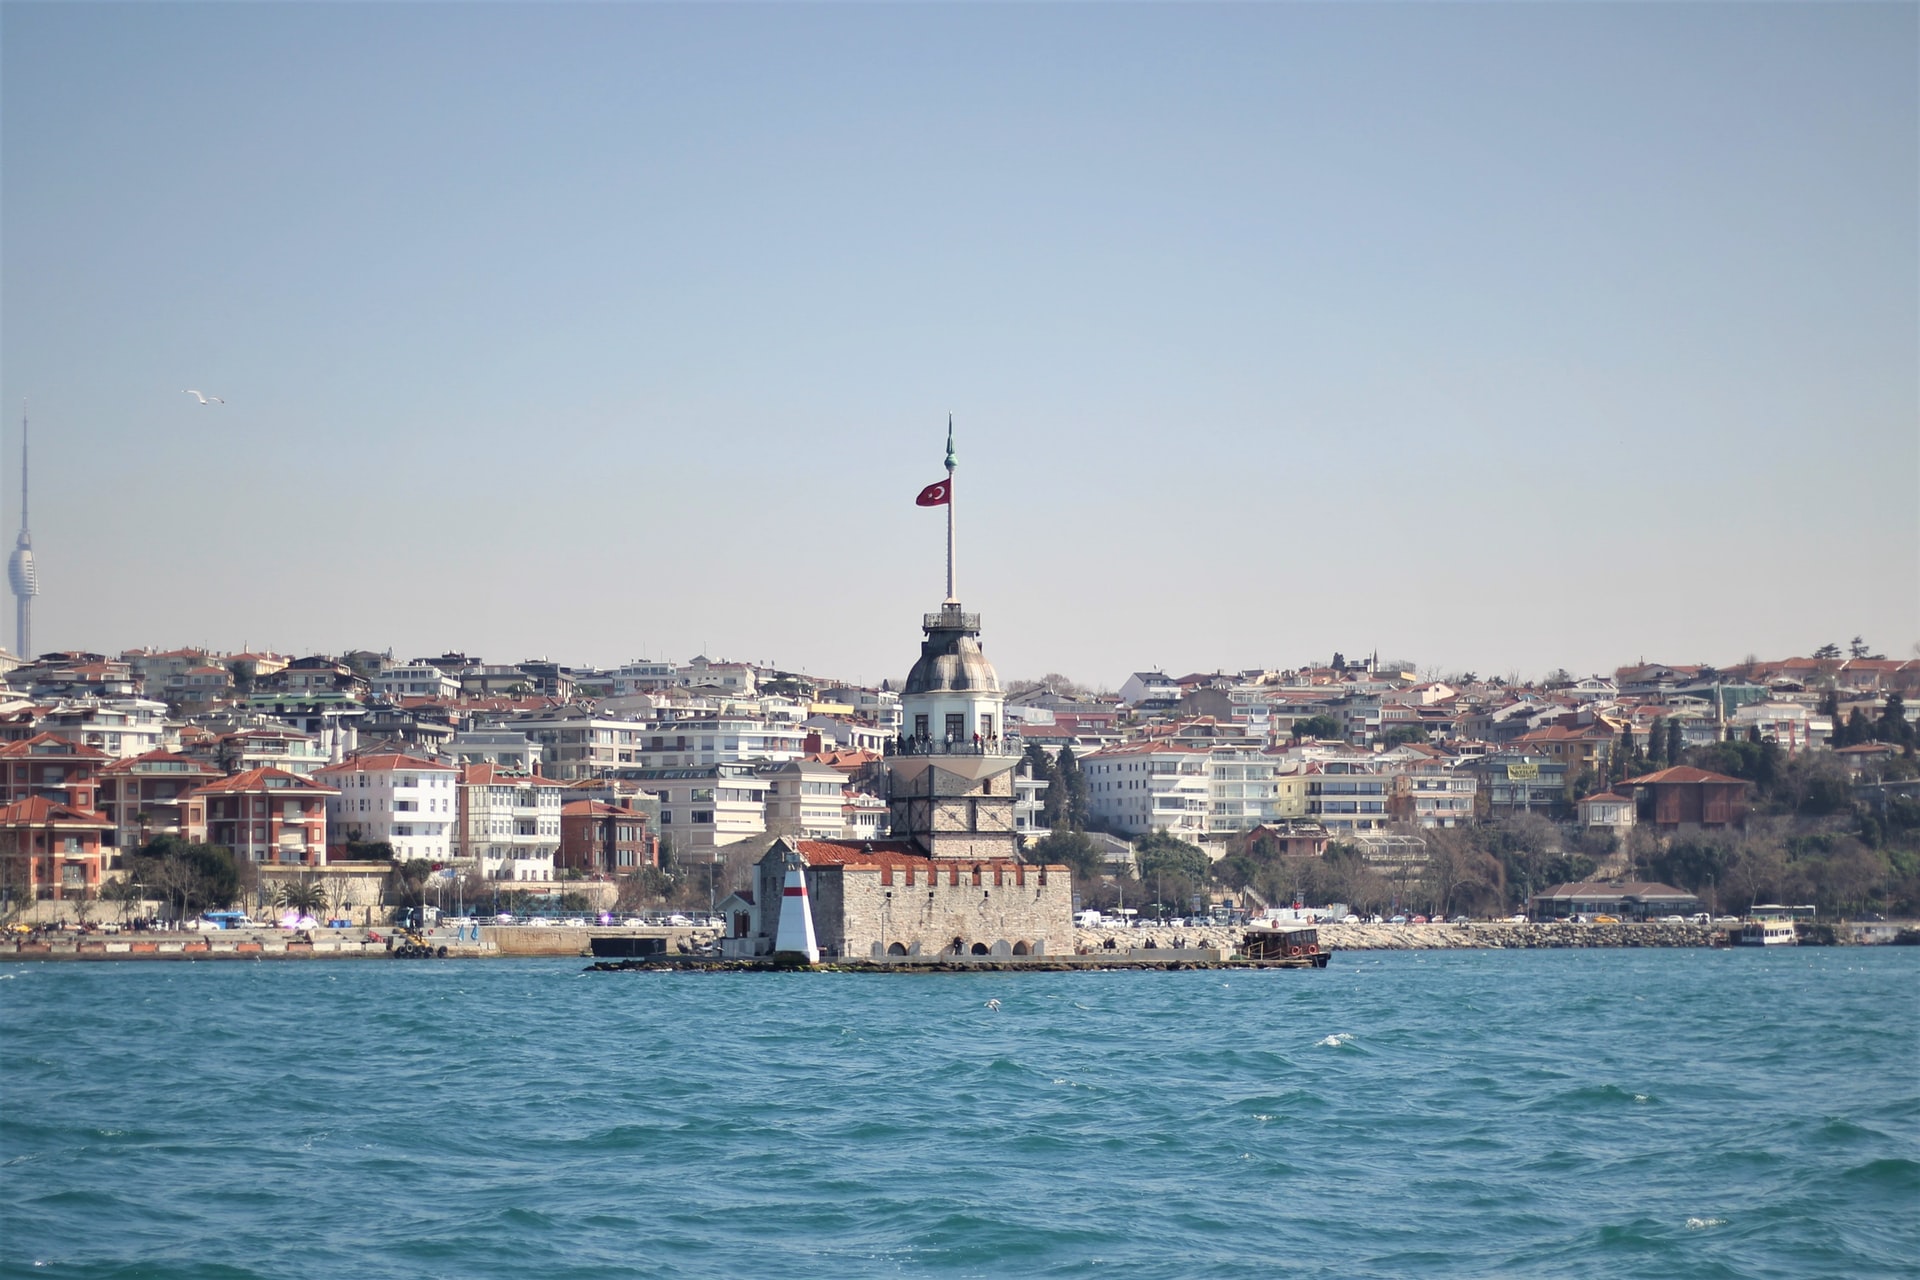 Often overlooked by tourists, Istanbul's Asian Side has a lot to offer